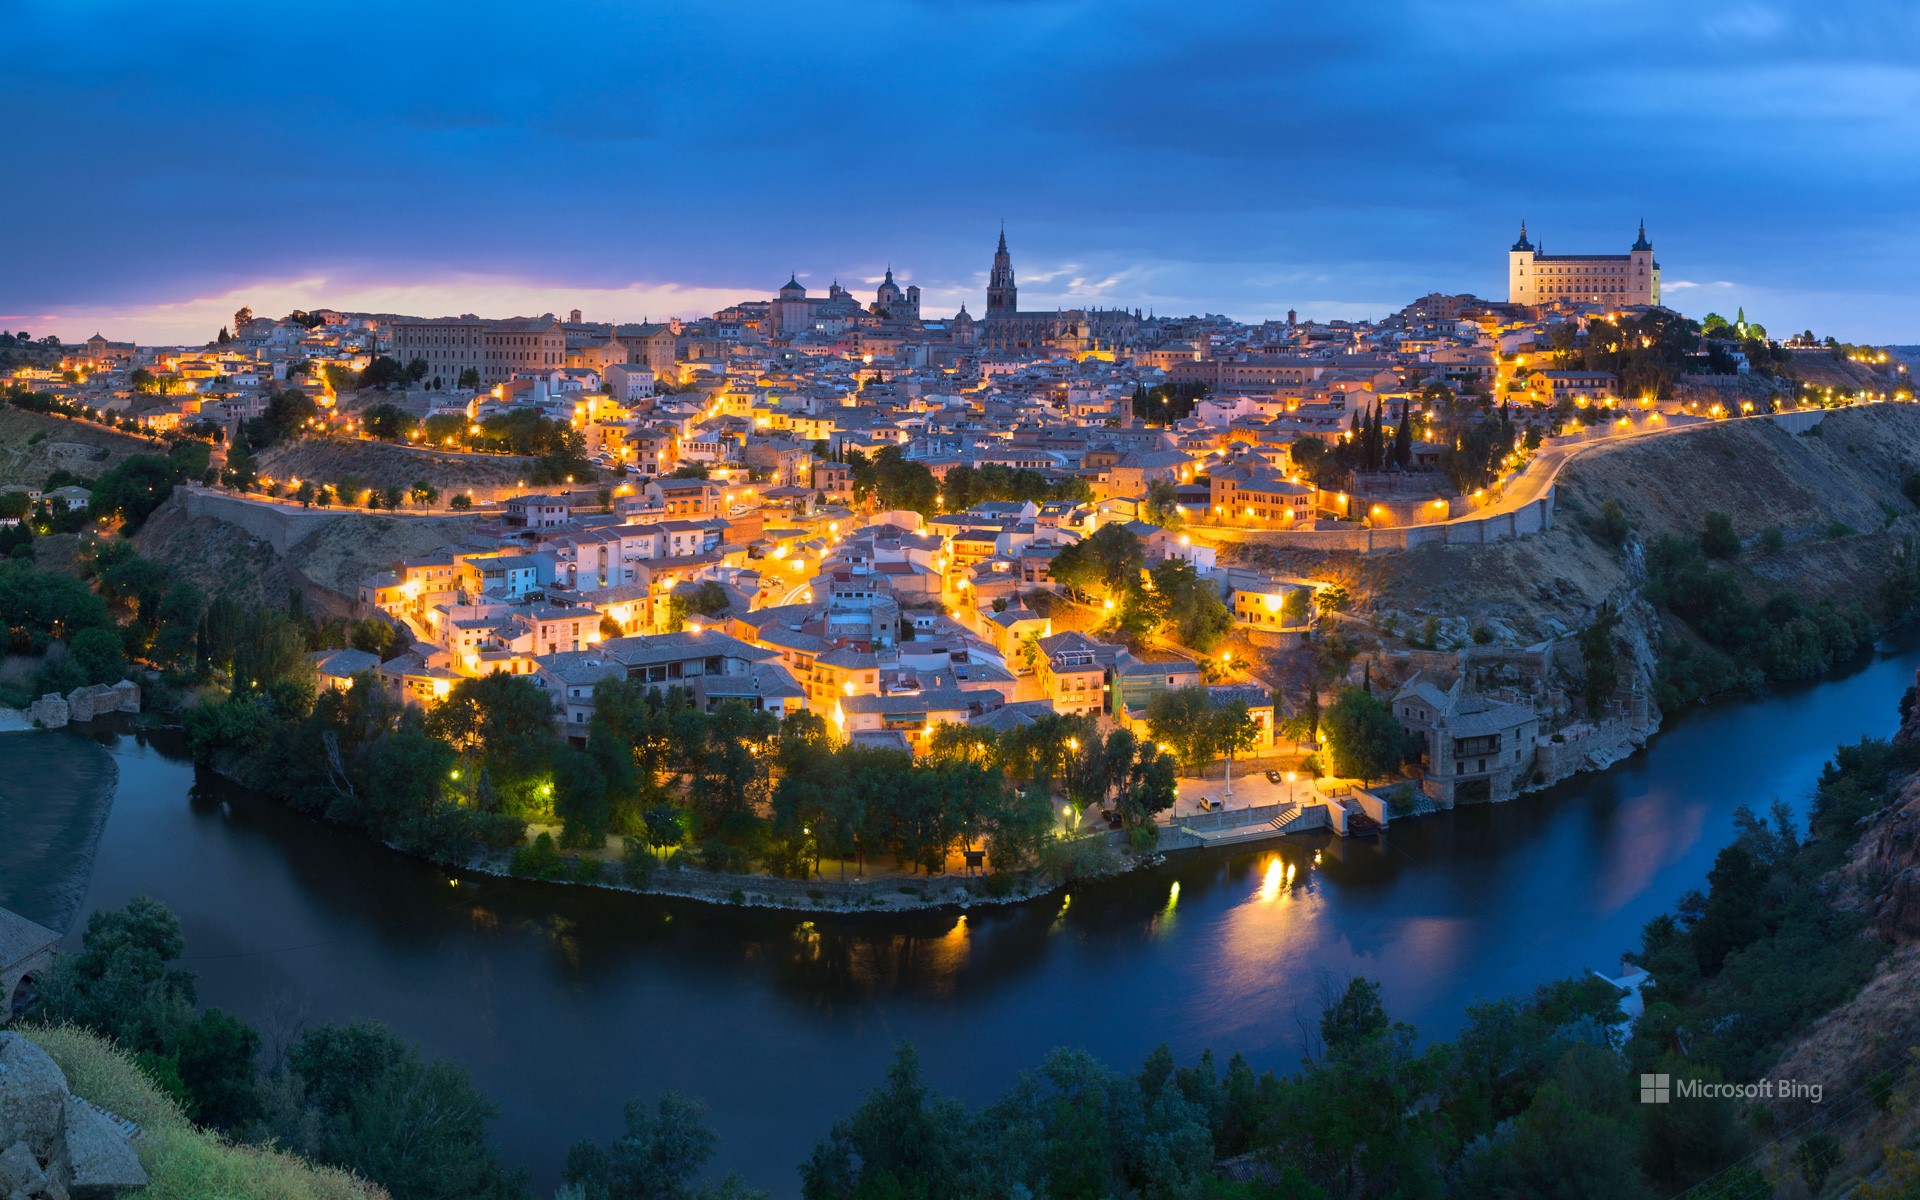 Panoramic view of the city of Toledo after sunset, Spain